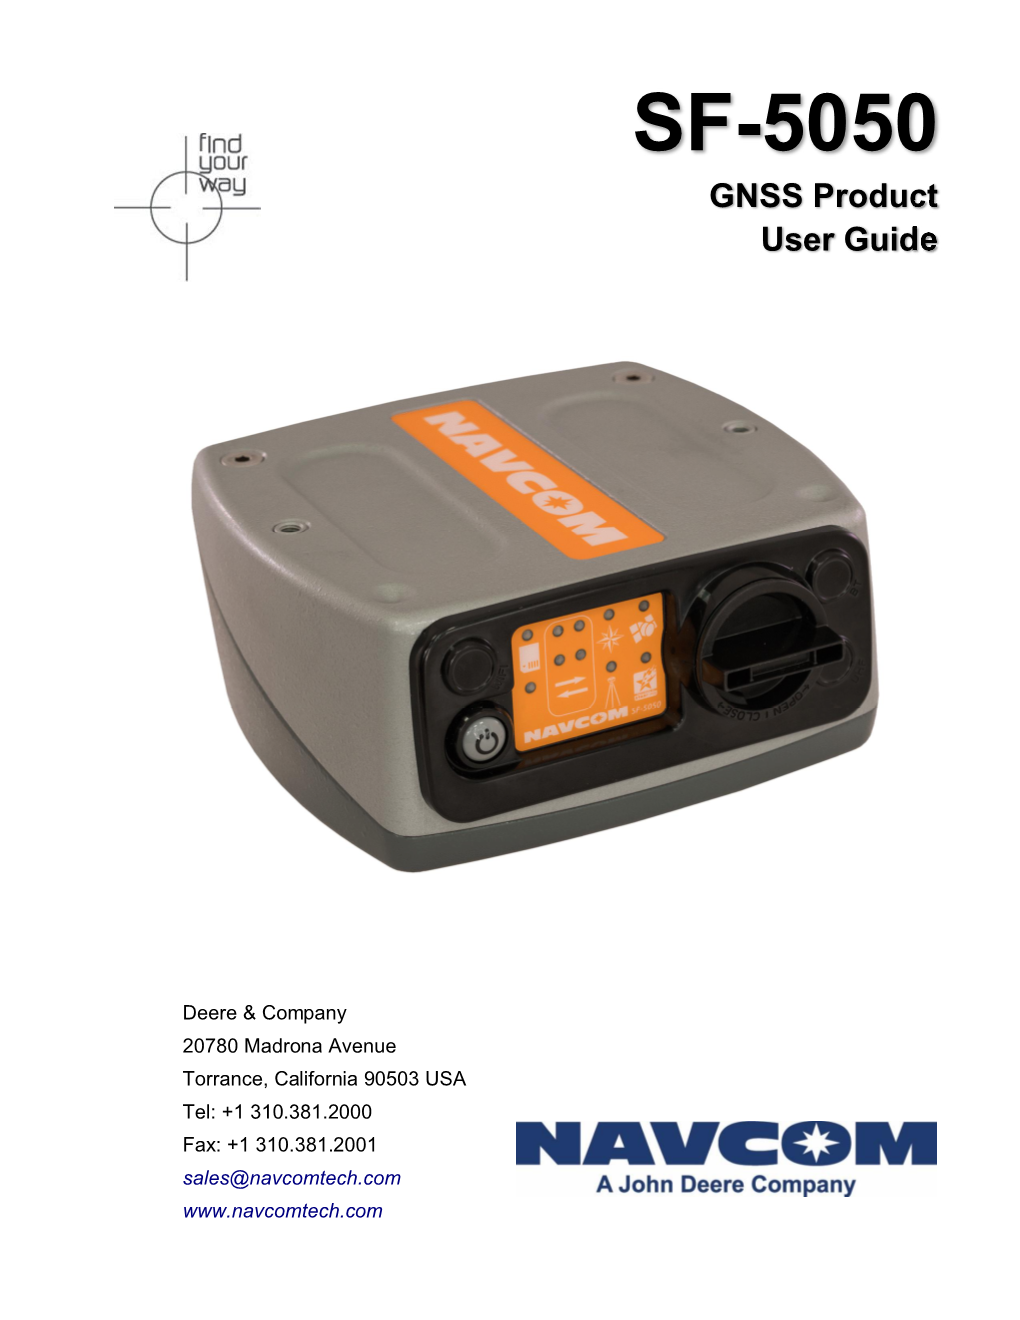 SF-5050 GNSS Products User Guide, Appendix E